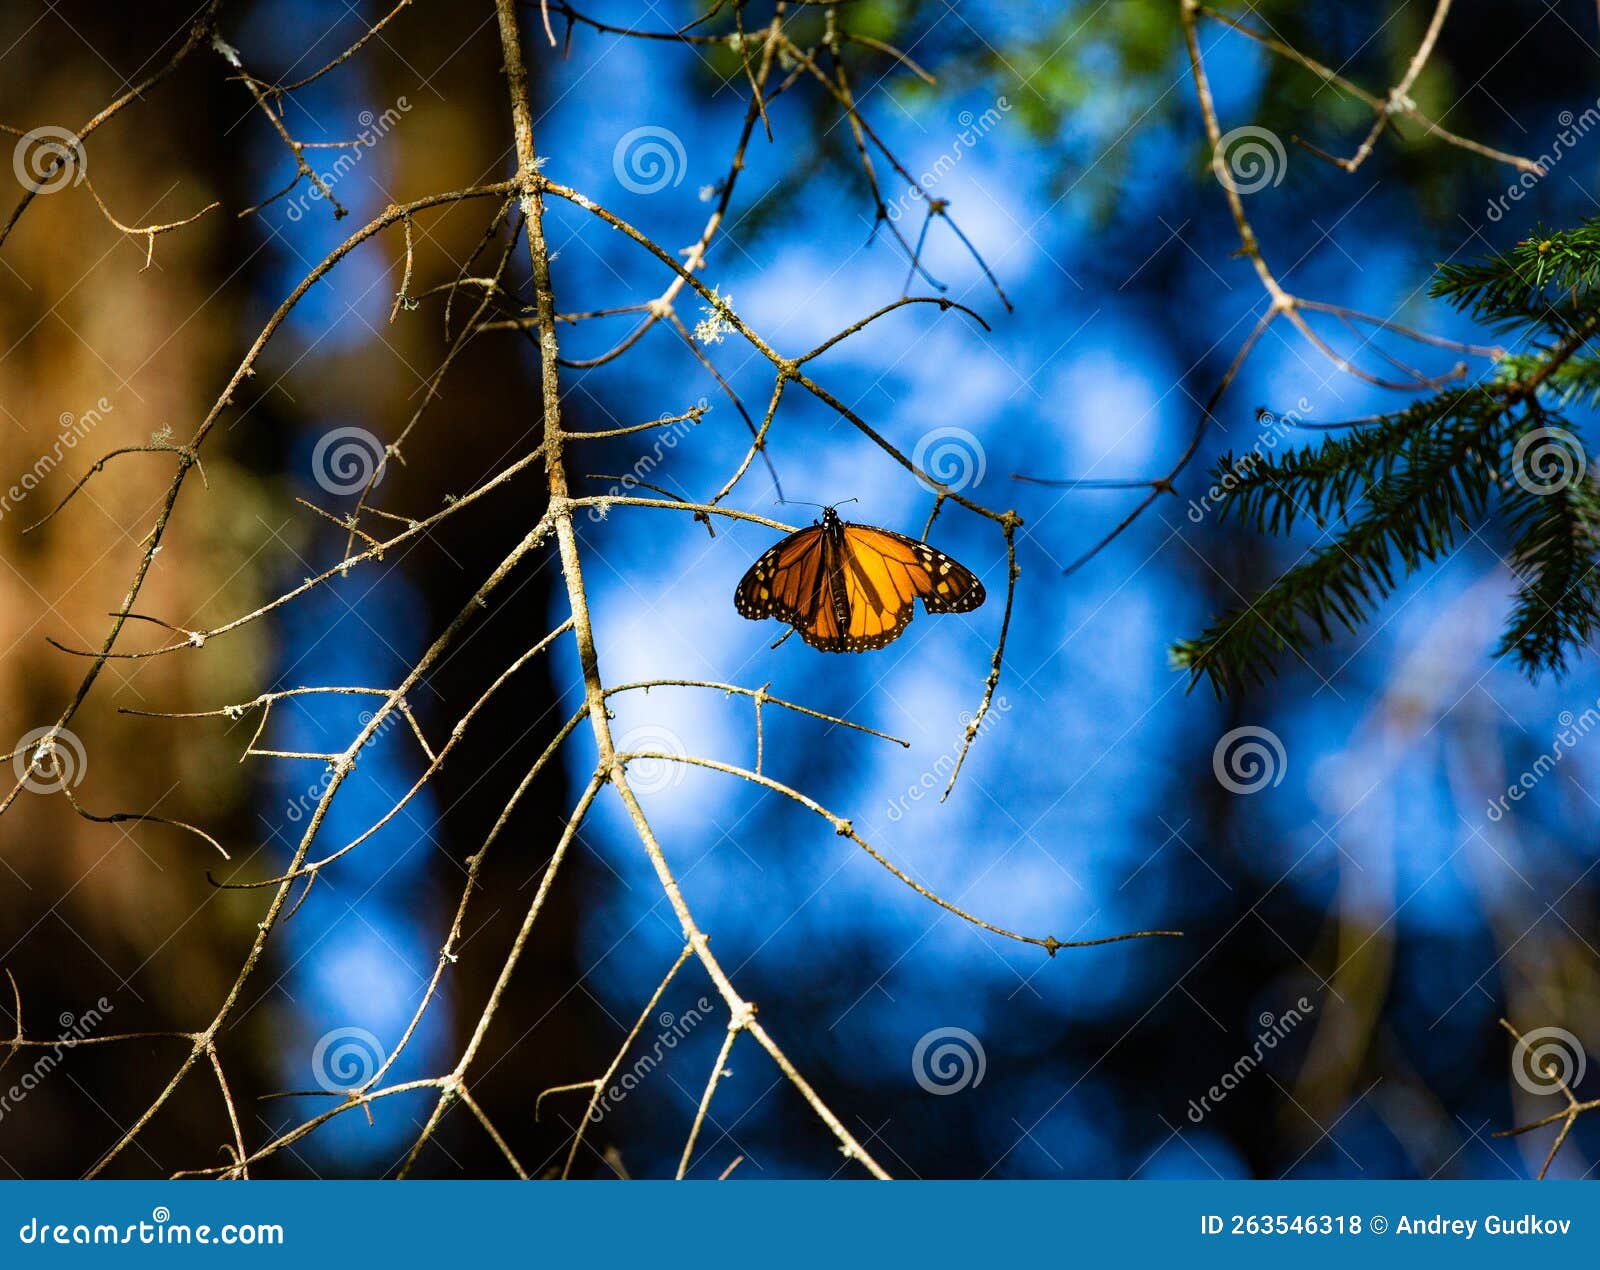 monarch butterfliy is sitting on branches in the forest in the park el rosario, reserve of the biosfera monarca. angangueo, state